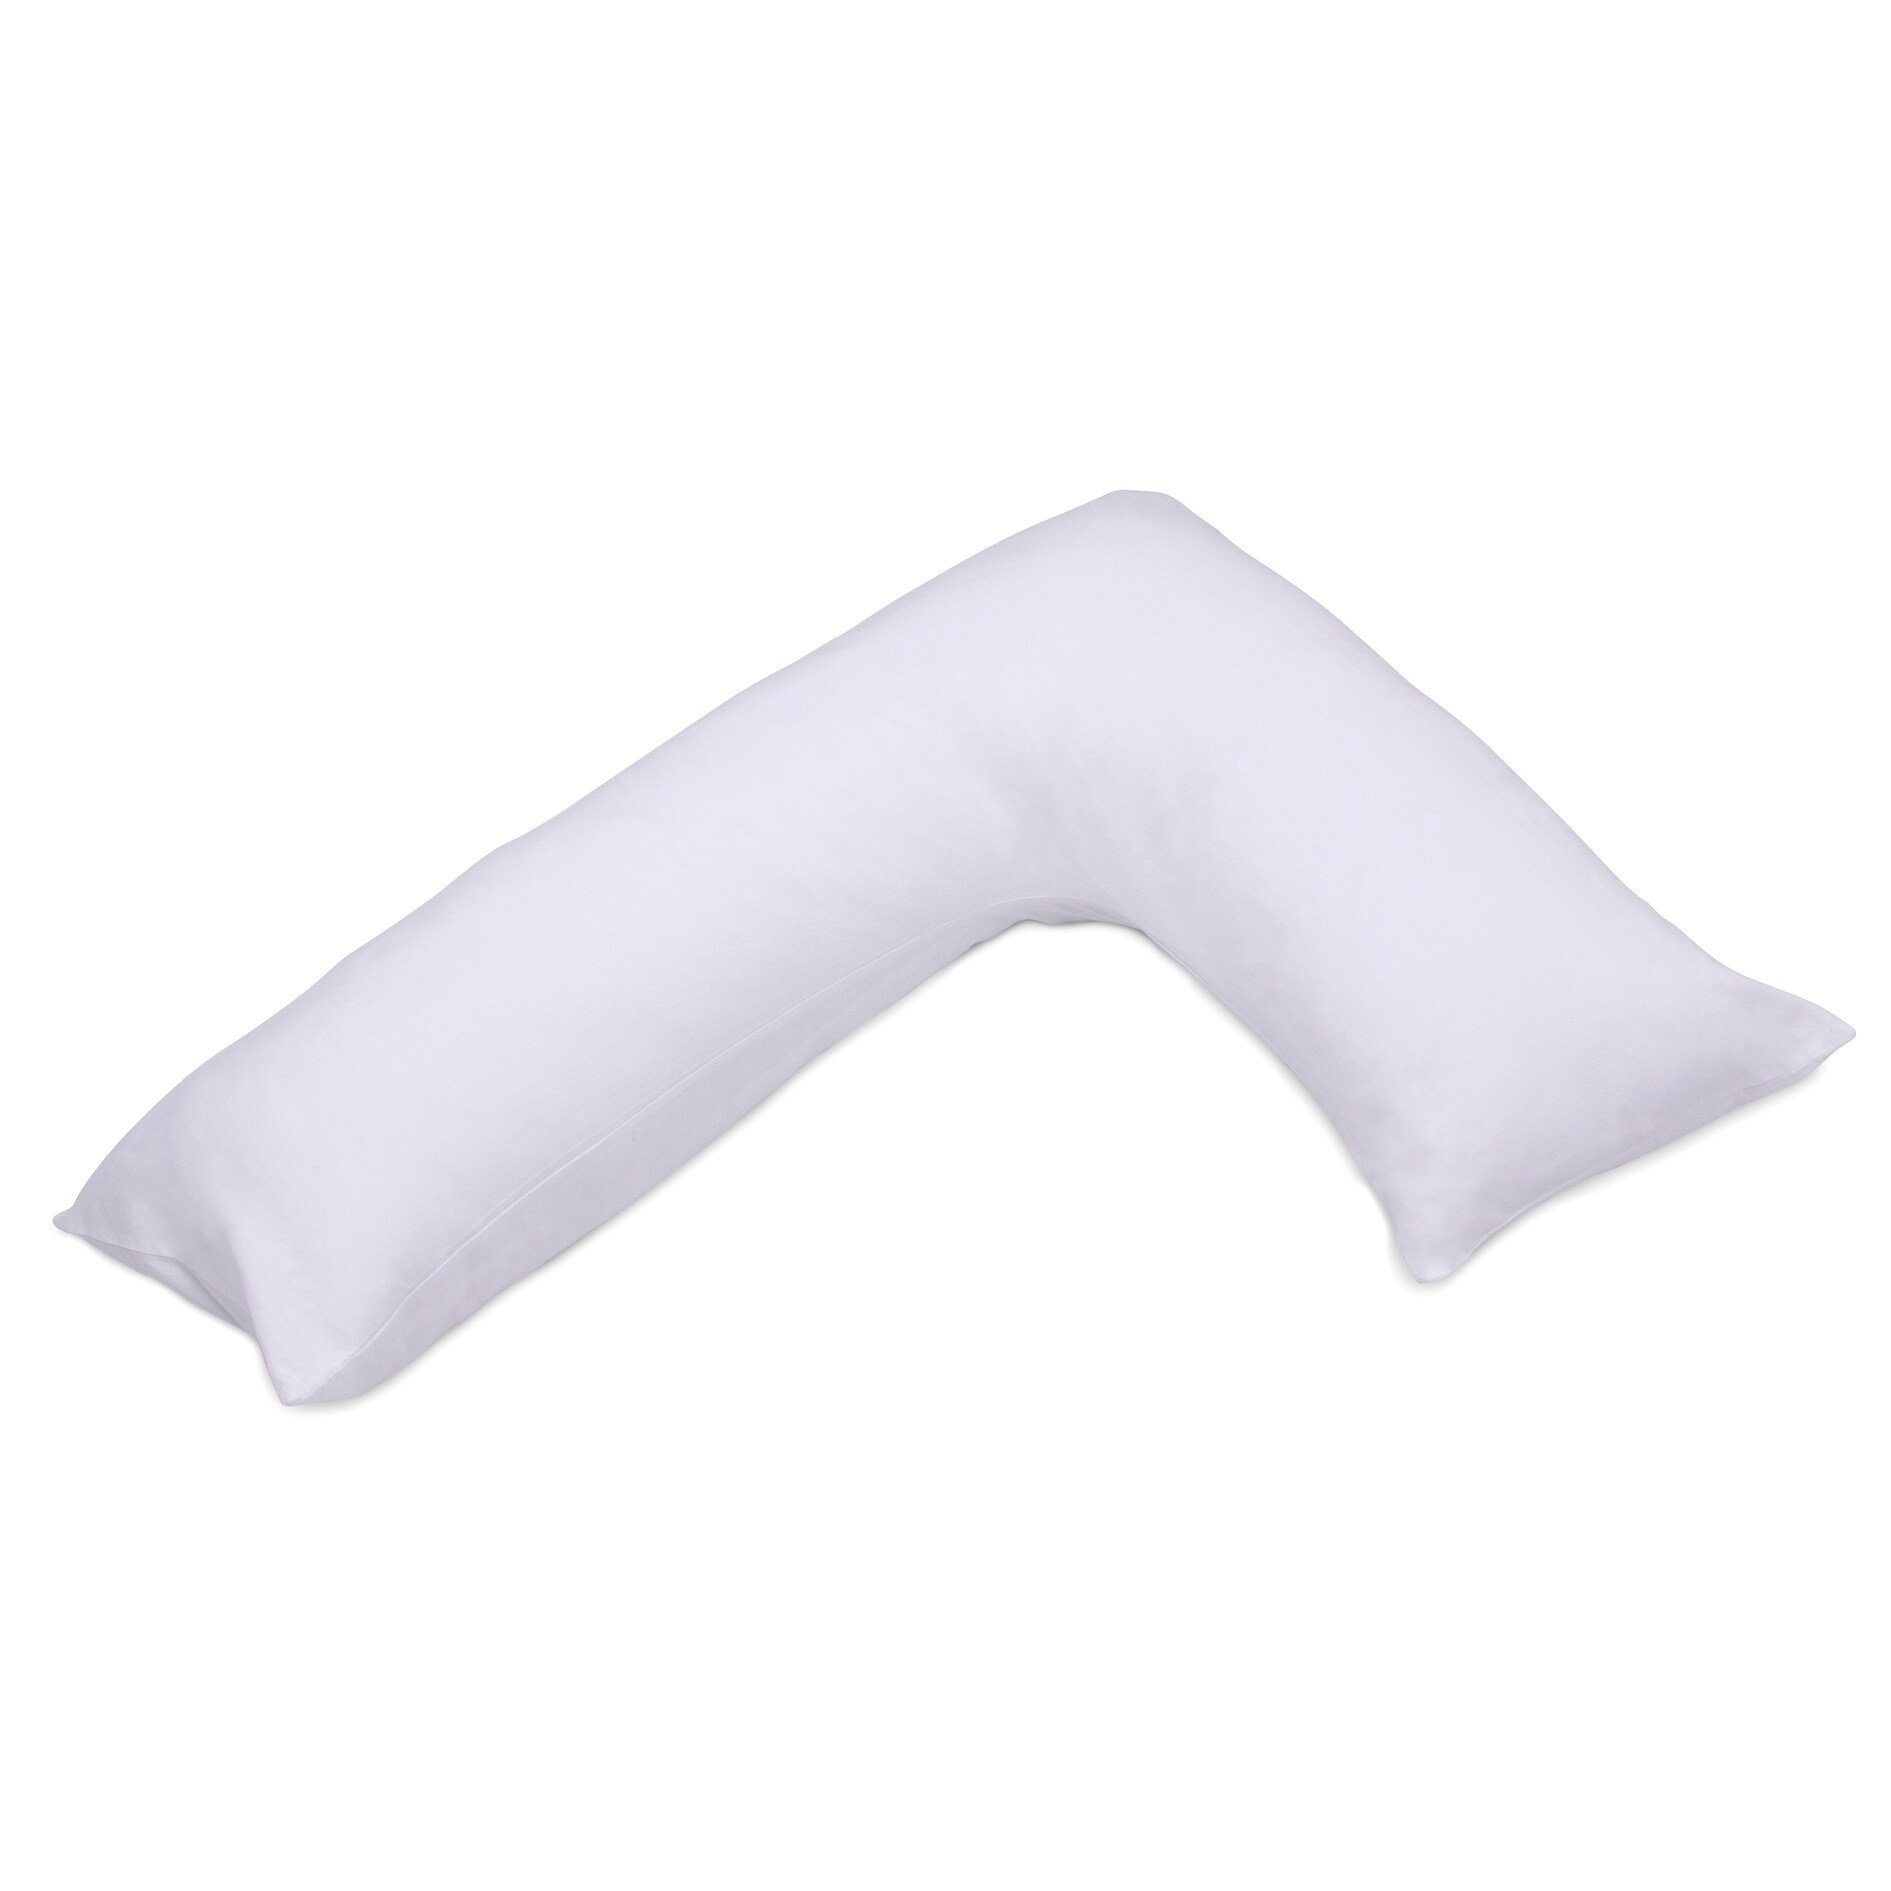 https://ak1.ostkcdn.com/images/products/10812283/L-Shaped-Long-Body-Pregnancy-Pillow-with-Neck-Support-for-Side-Sleeping-fe802c06-8830-4079-a379-7e2b7a87d55f.jpg